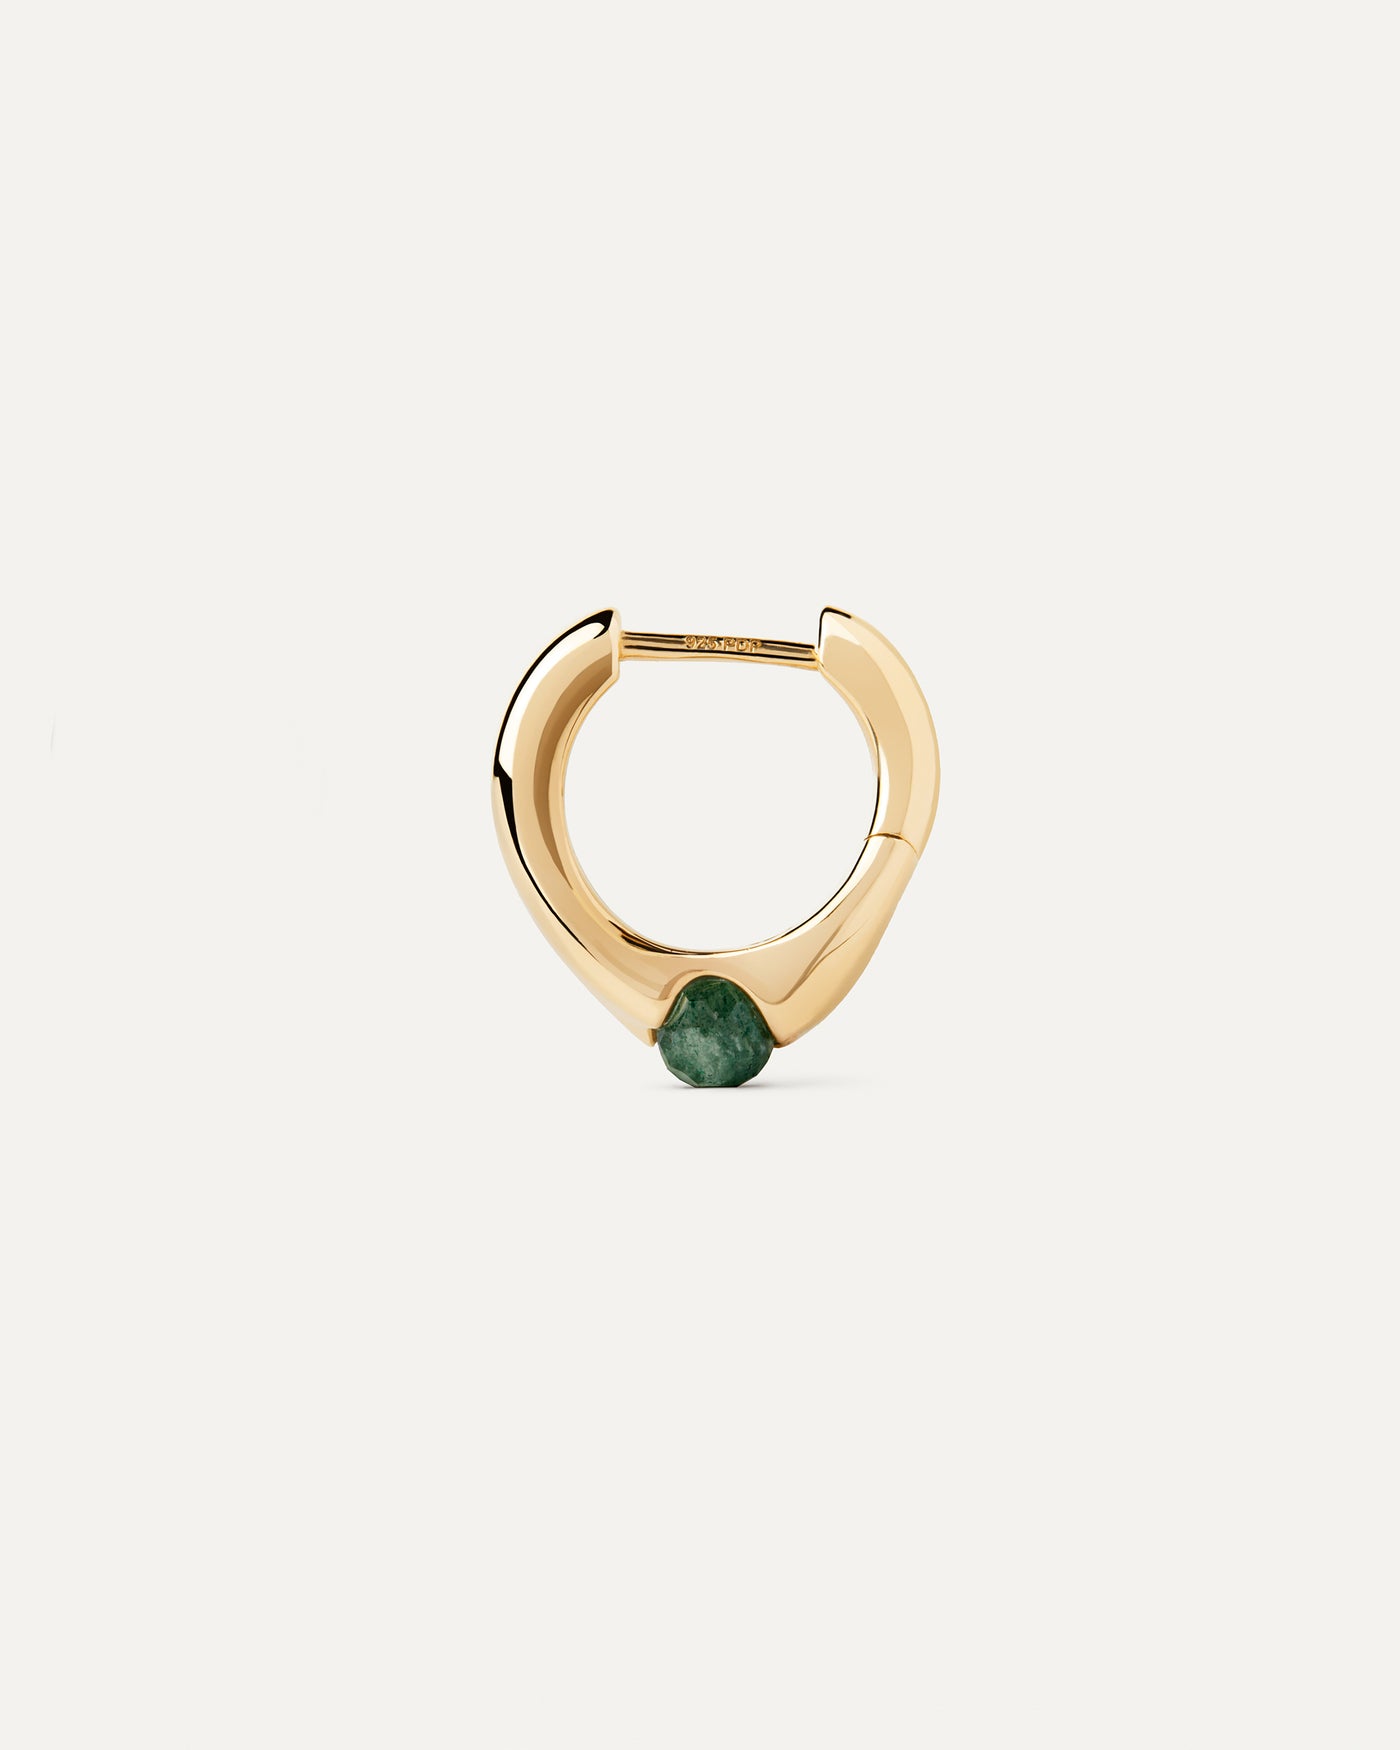 2023 Selection | Oasis Single Hoop. Gold-plated organic shape huggie single hoop featuring a round cut green aventurine. Get the latest arrival from PDPAOLA. Place your order safely and get this Best Seller. Free Shipping.